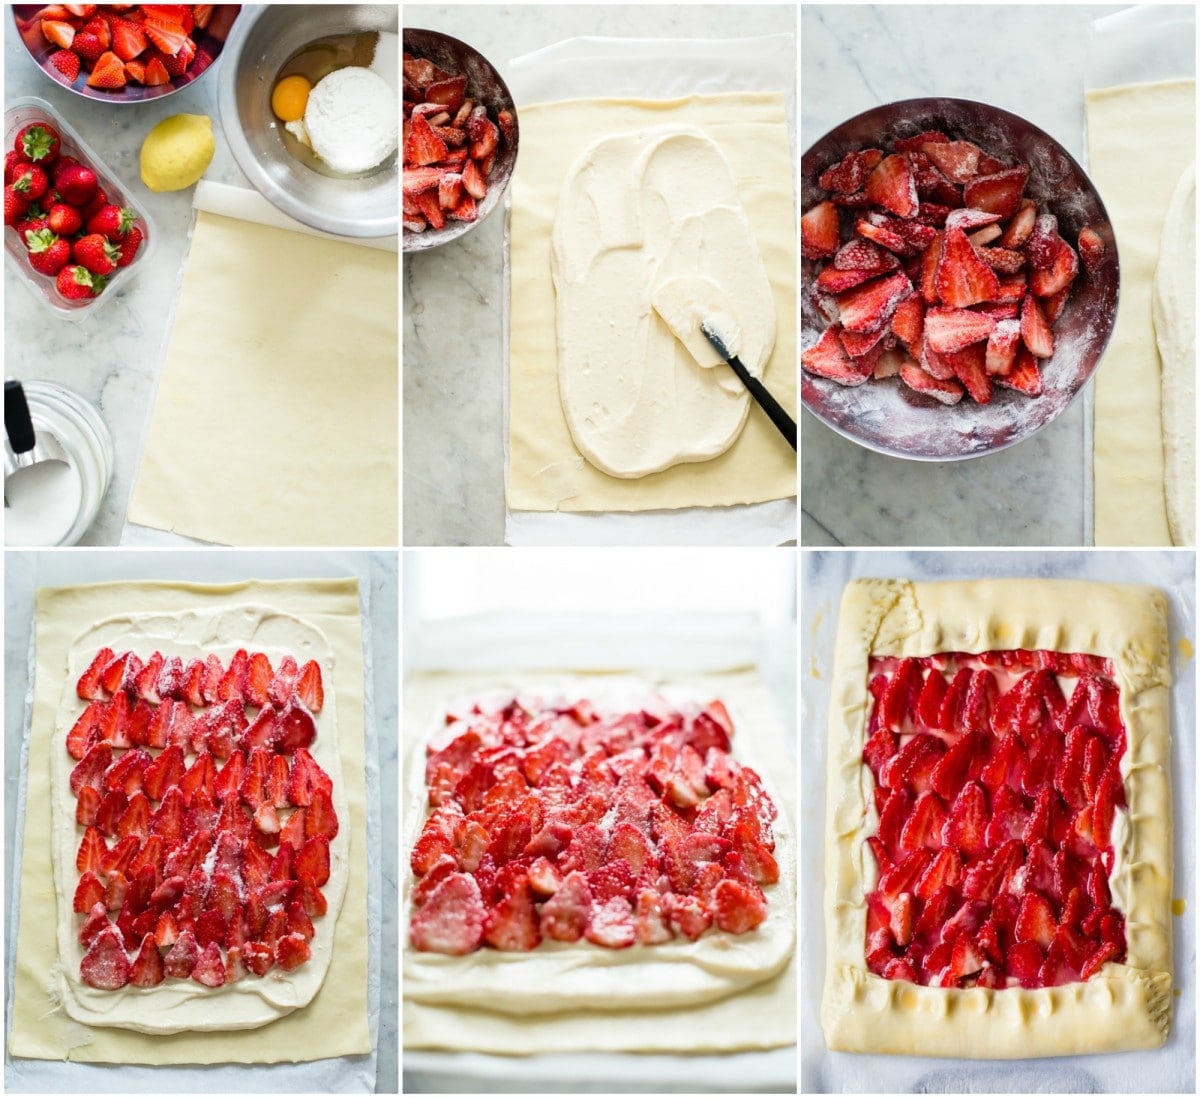 Process shots of making rustic strawberry galette in six steps showing assembly